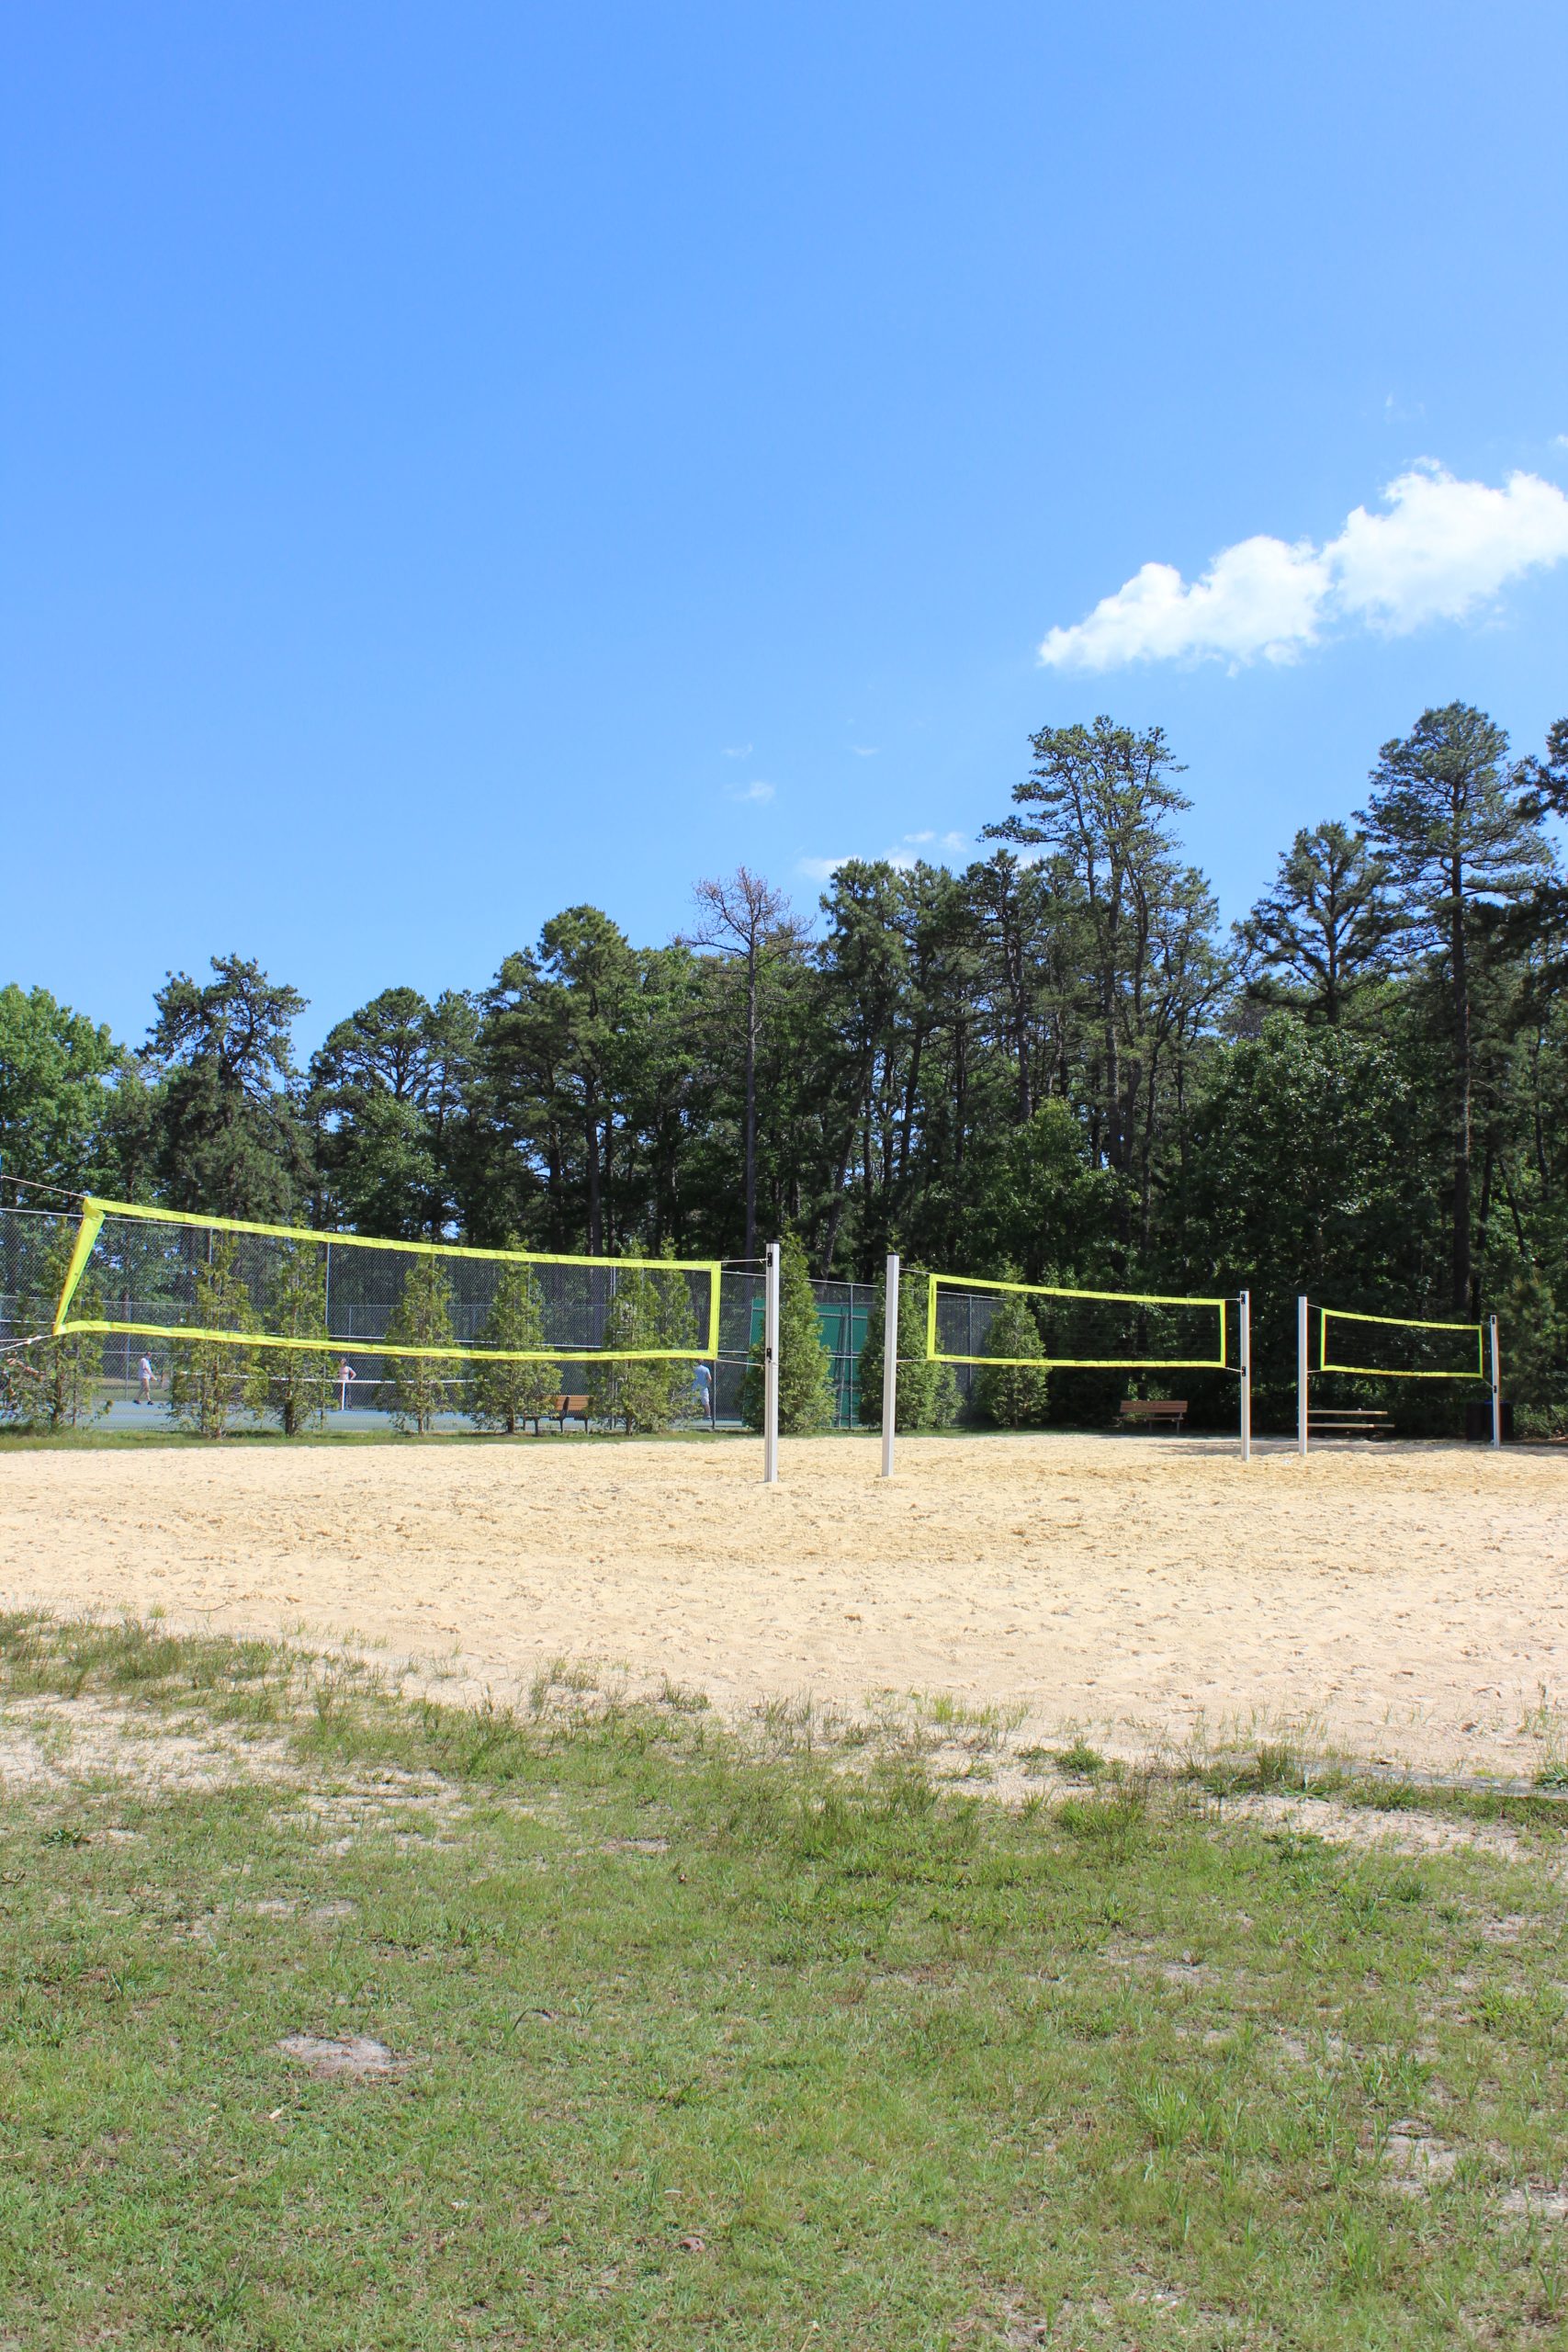 sand volleyball courts at Tony Canale Park in Egg Harbor Township New Jersey